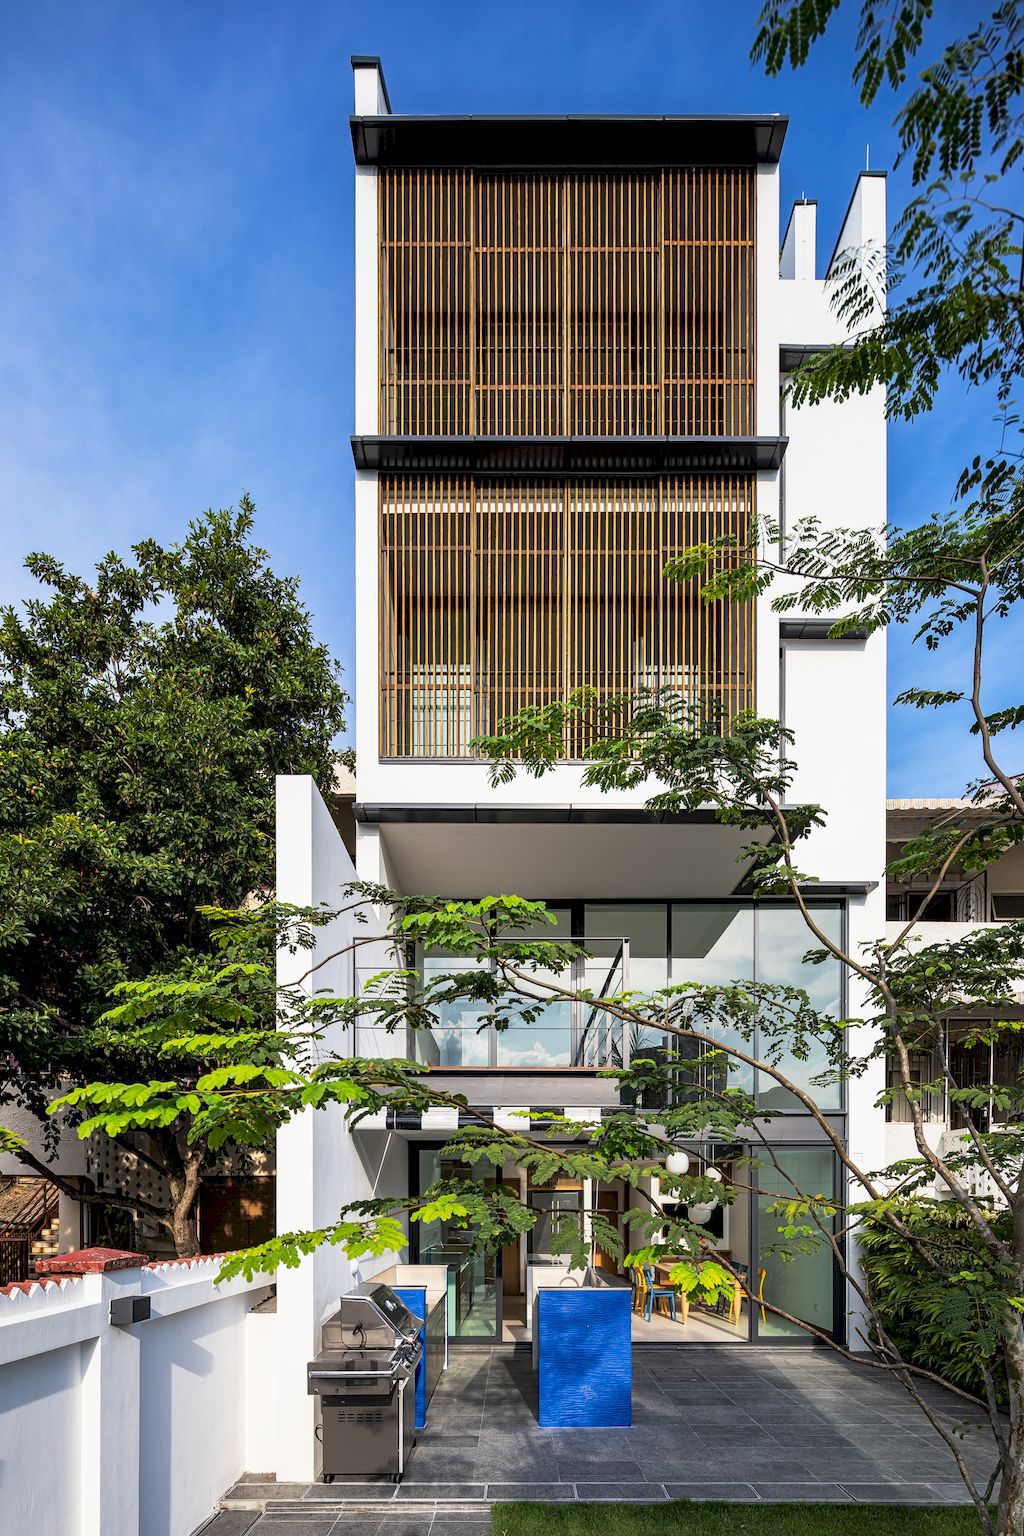 Hill-Terrace-House-Stunning-3-storey-Home-in-Singapore-by-Atelier-MA-2